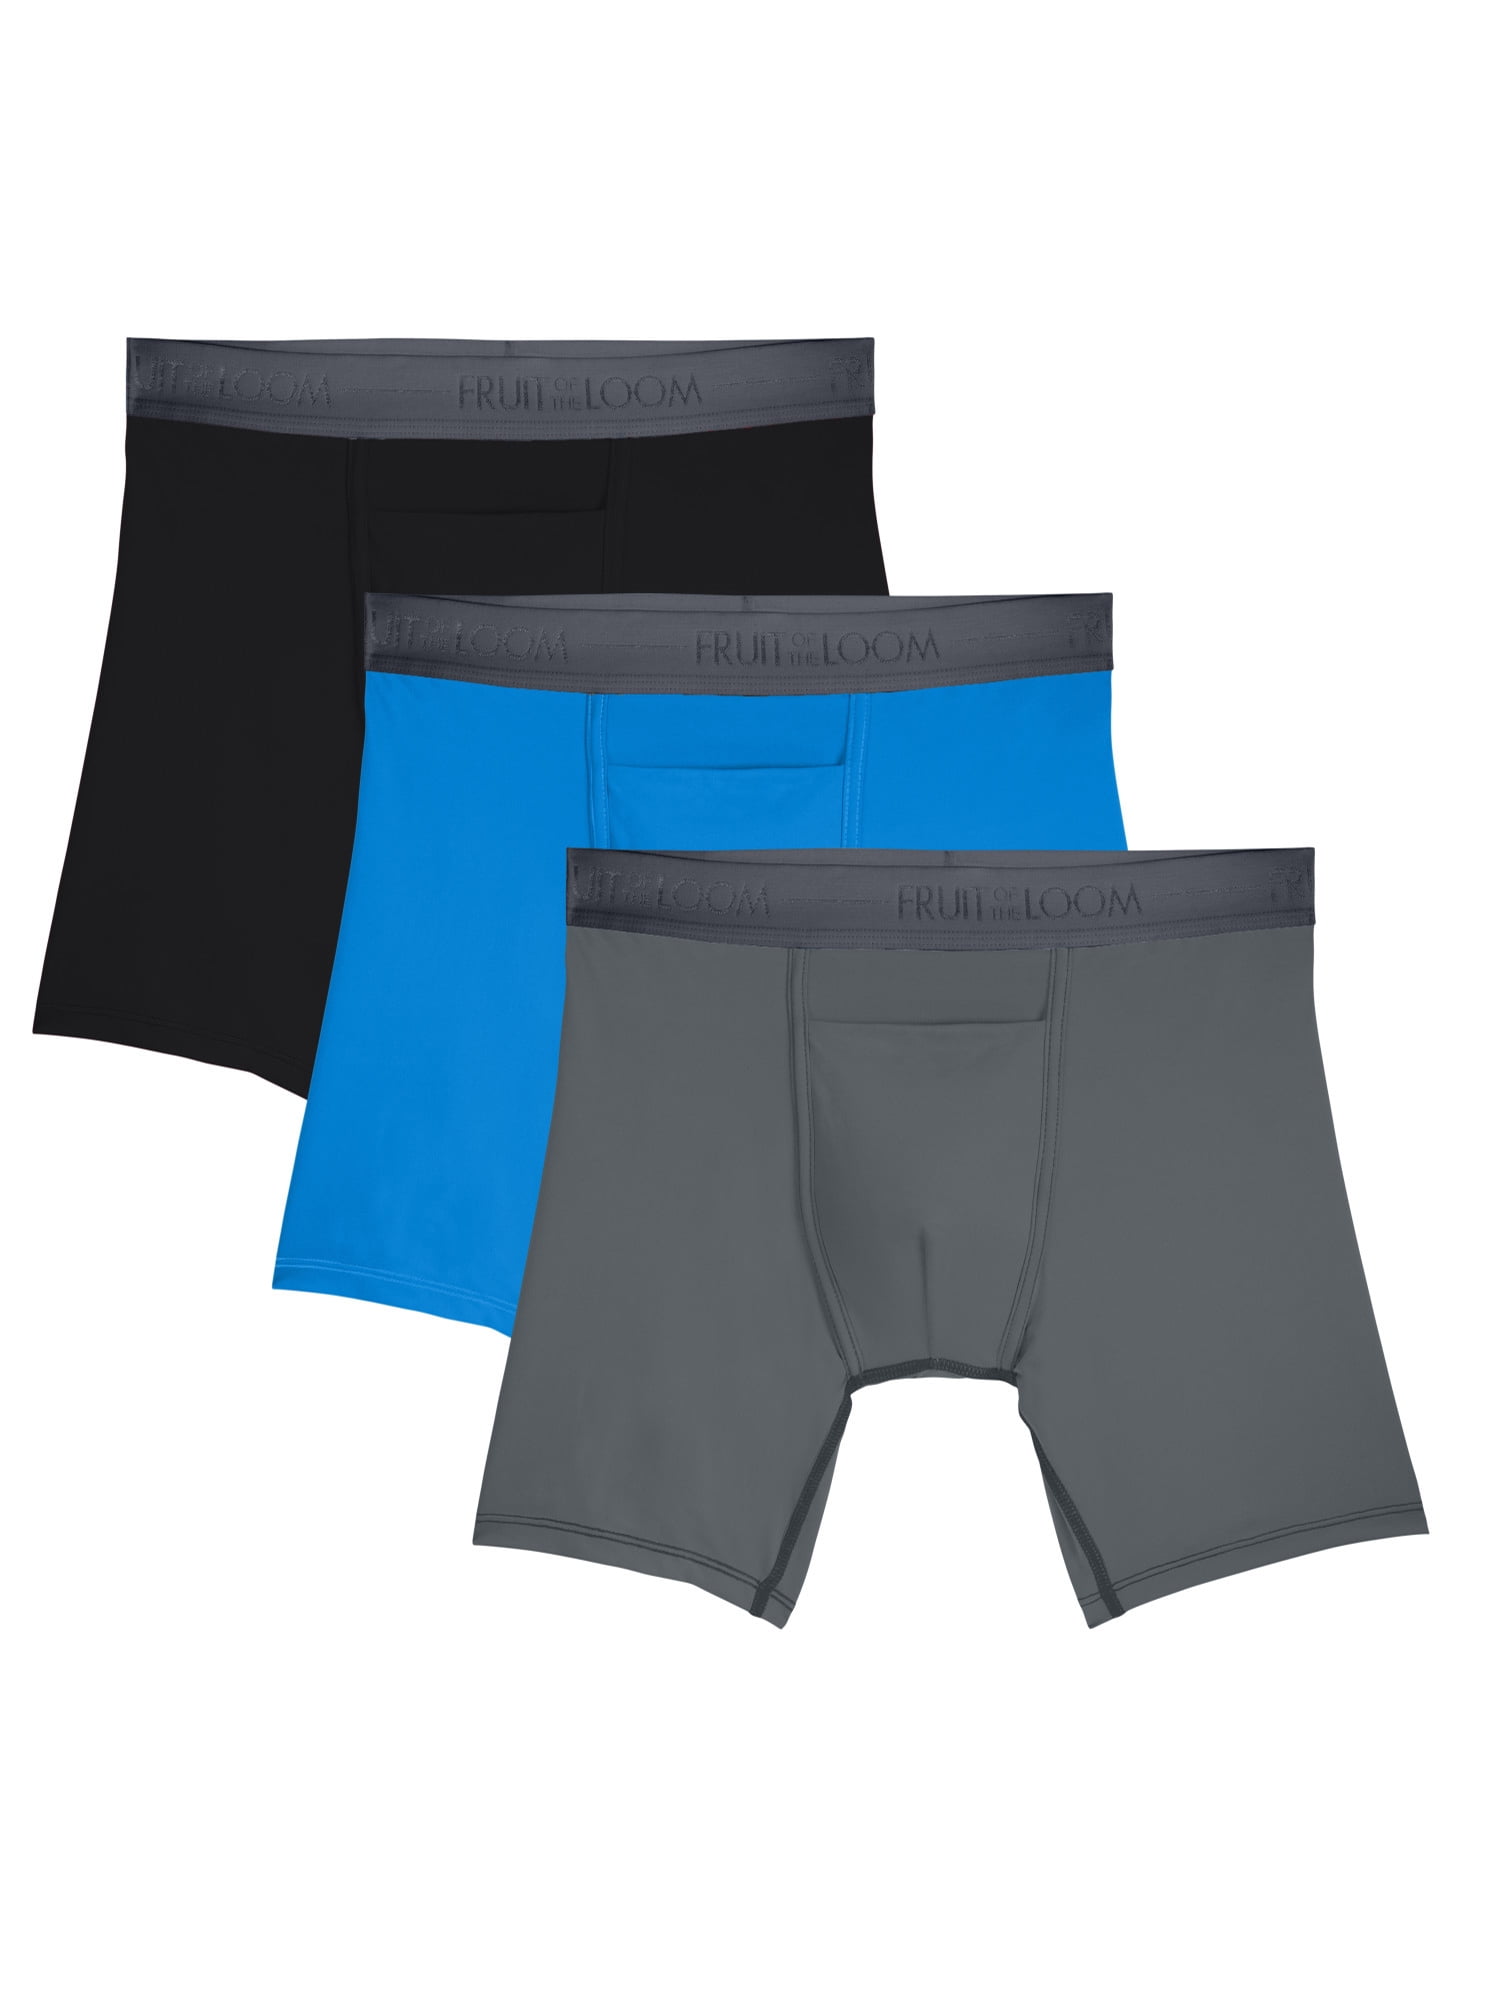 Fruit of the Loom Men's EverLight Go Active Assorted Boxer Briefs, 3 Pack,  Extended Sizes